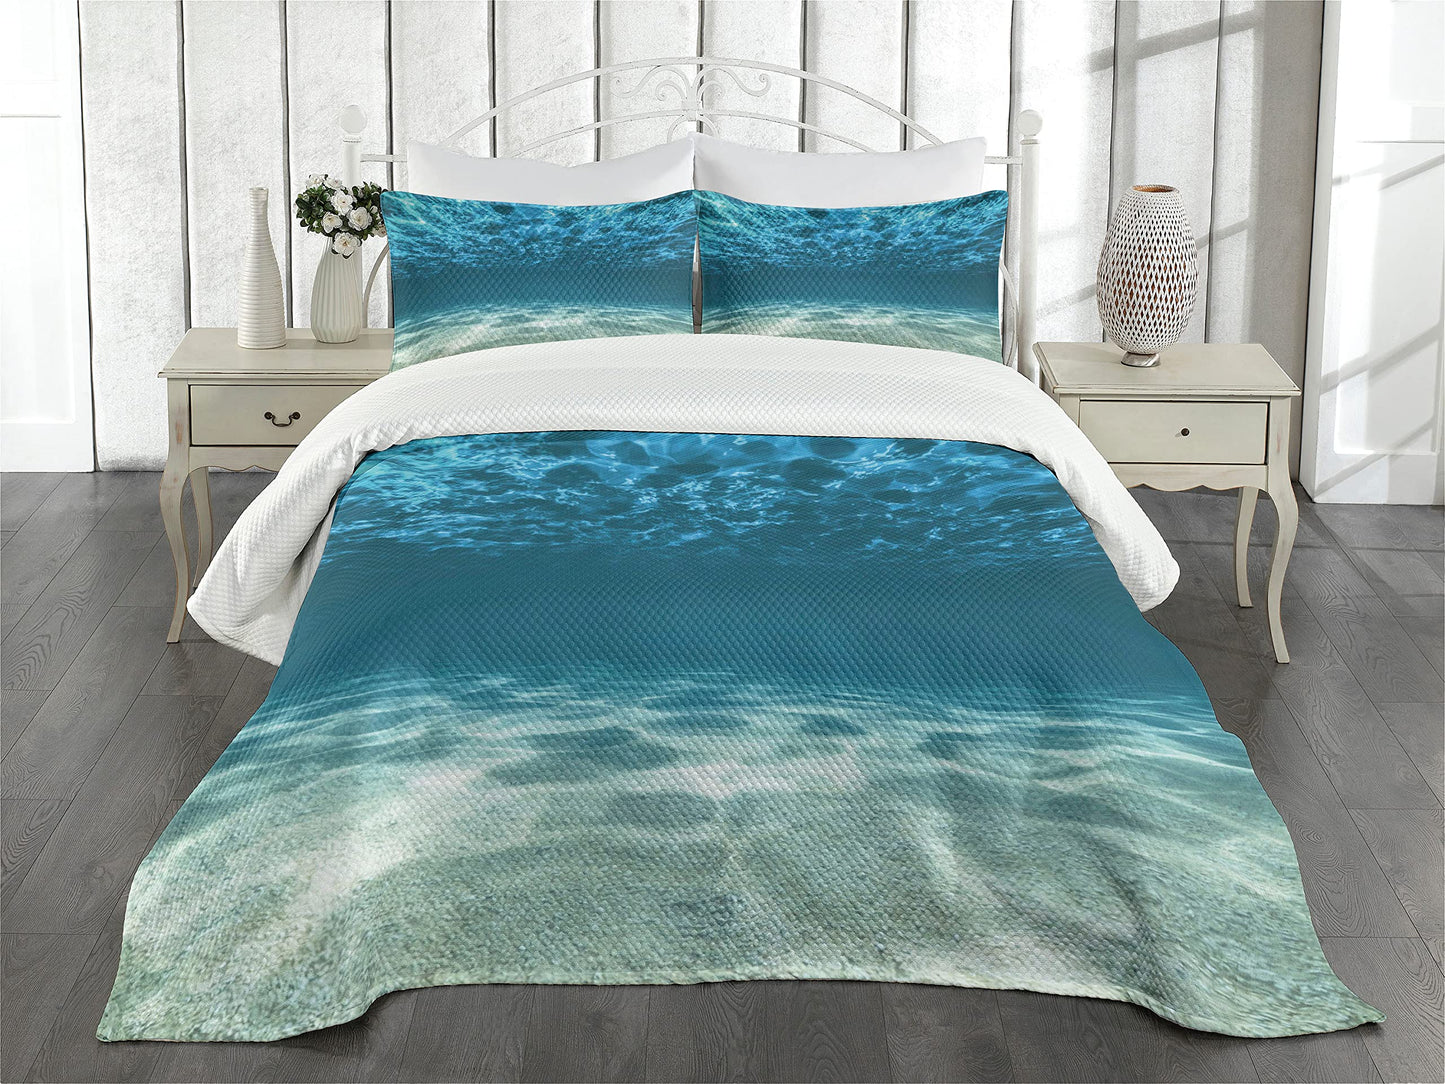 Lunarable Ocean Bedspread, Gravelly Bottom Wavy Surface Tropical Seascape Abyss Underwater Sunny Day Image, Decorative Quilted 3 Piece Coverlet Set with 2 Pillow Shams, Queen Size, Ivory Blue